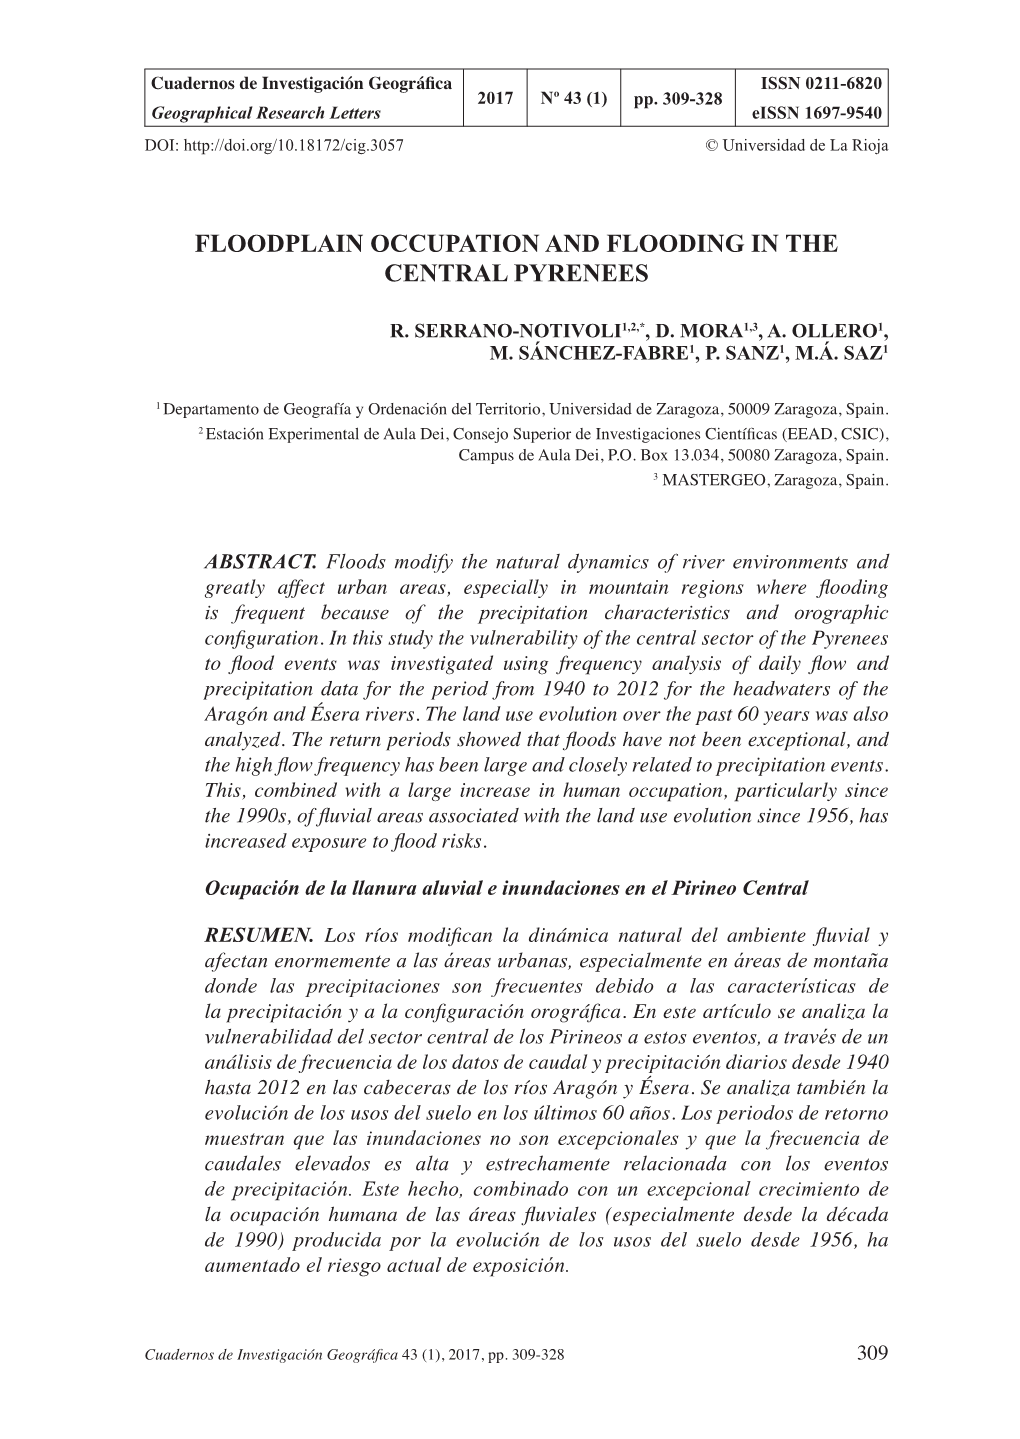 Floodplain Occupation and Flooding in the Central Pyrenees